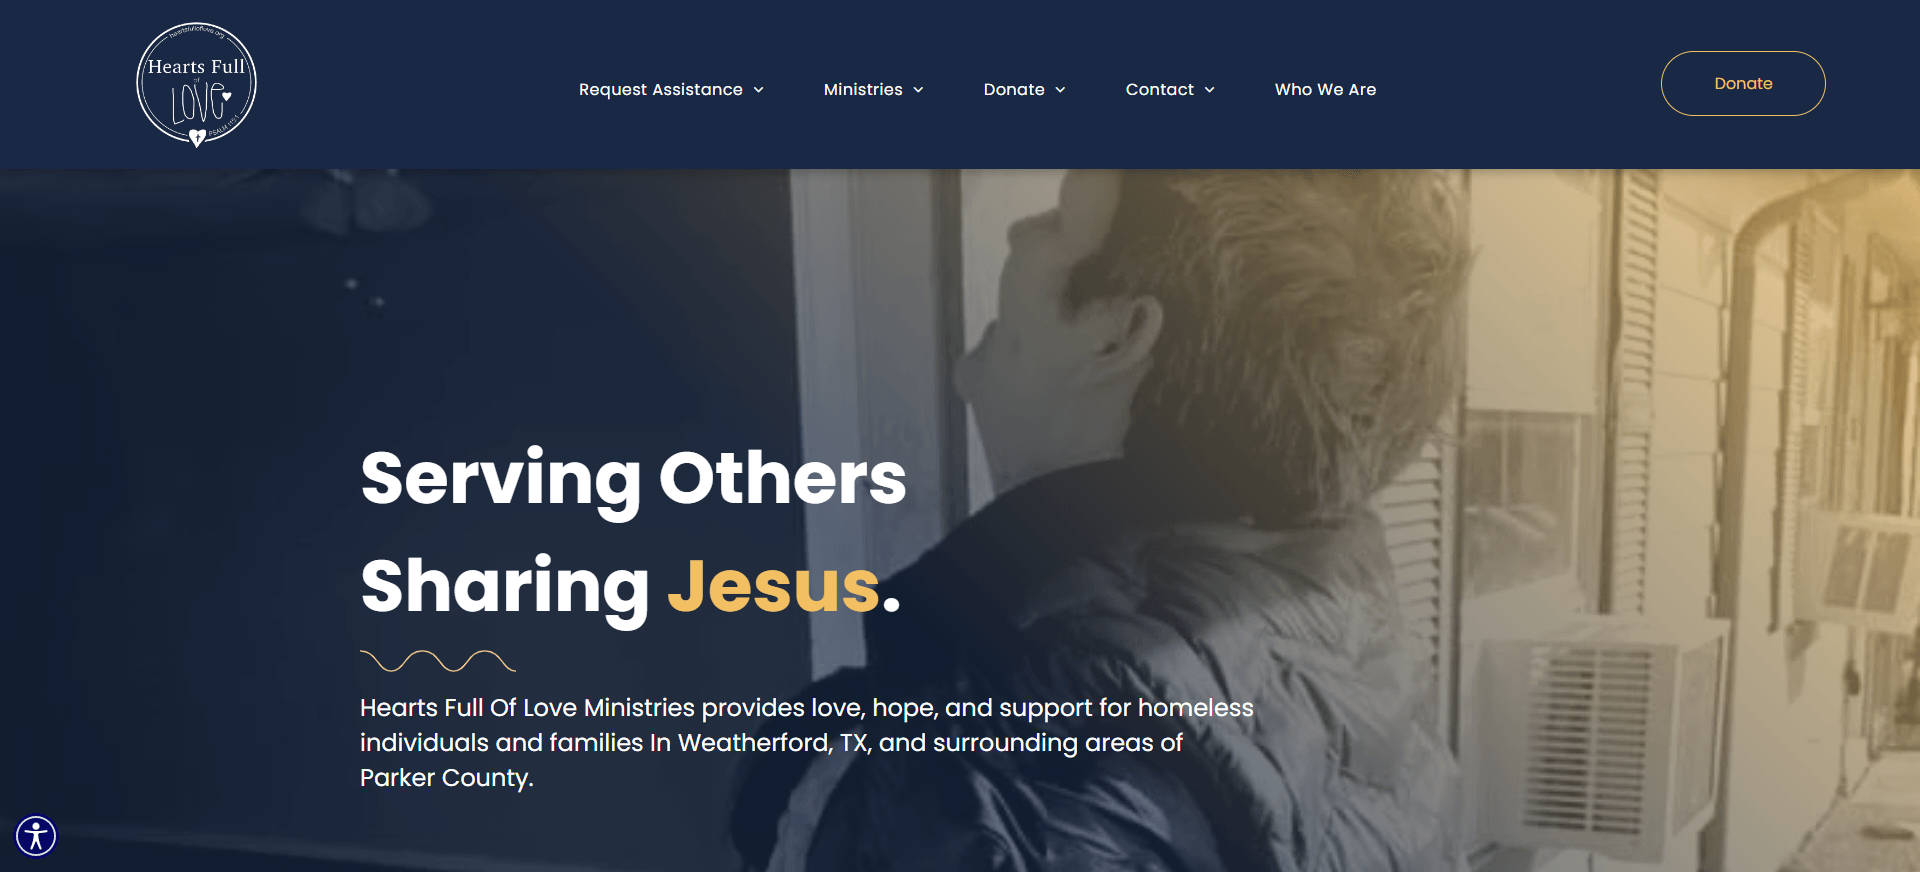 Hearts Full Of Love Ministries - Web Design